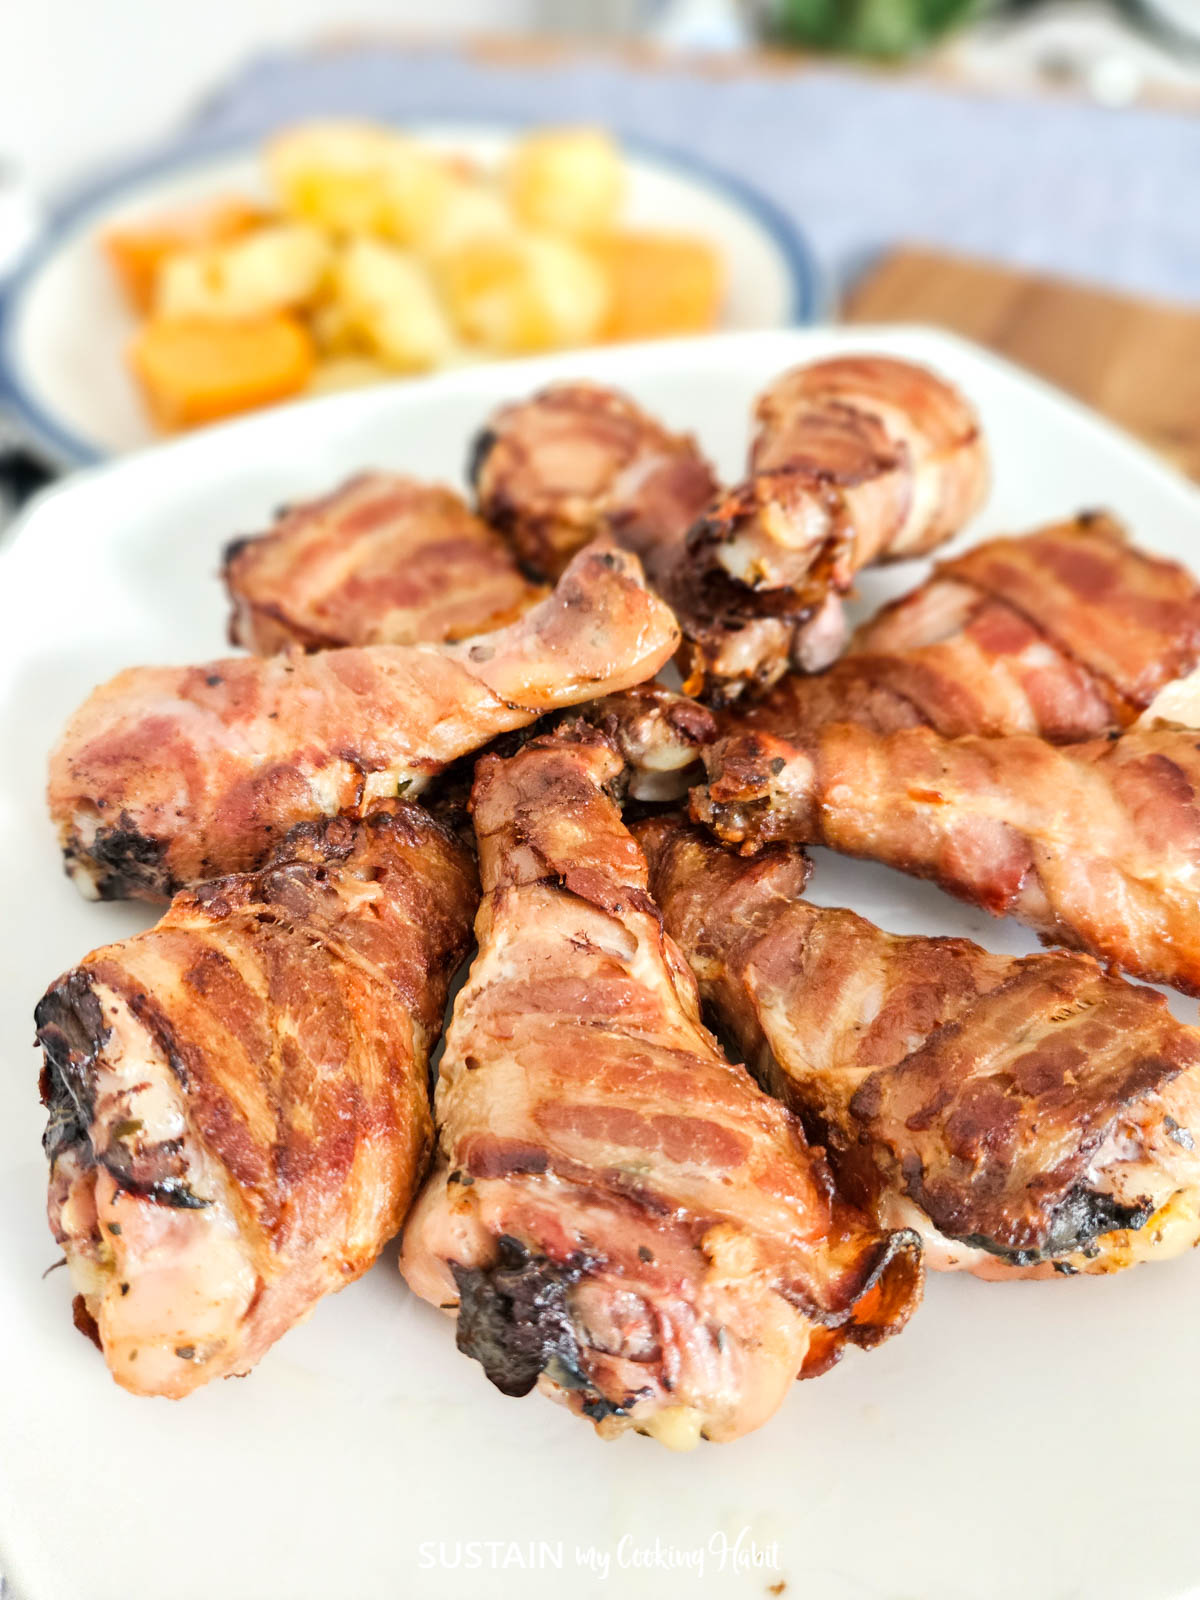 Bacon wrapped drumsticks on a plate.